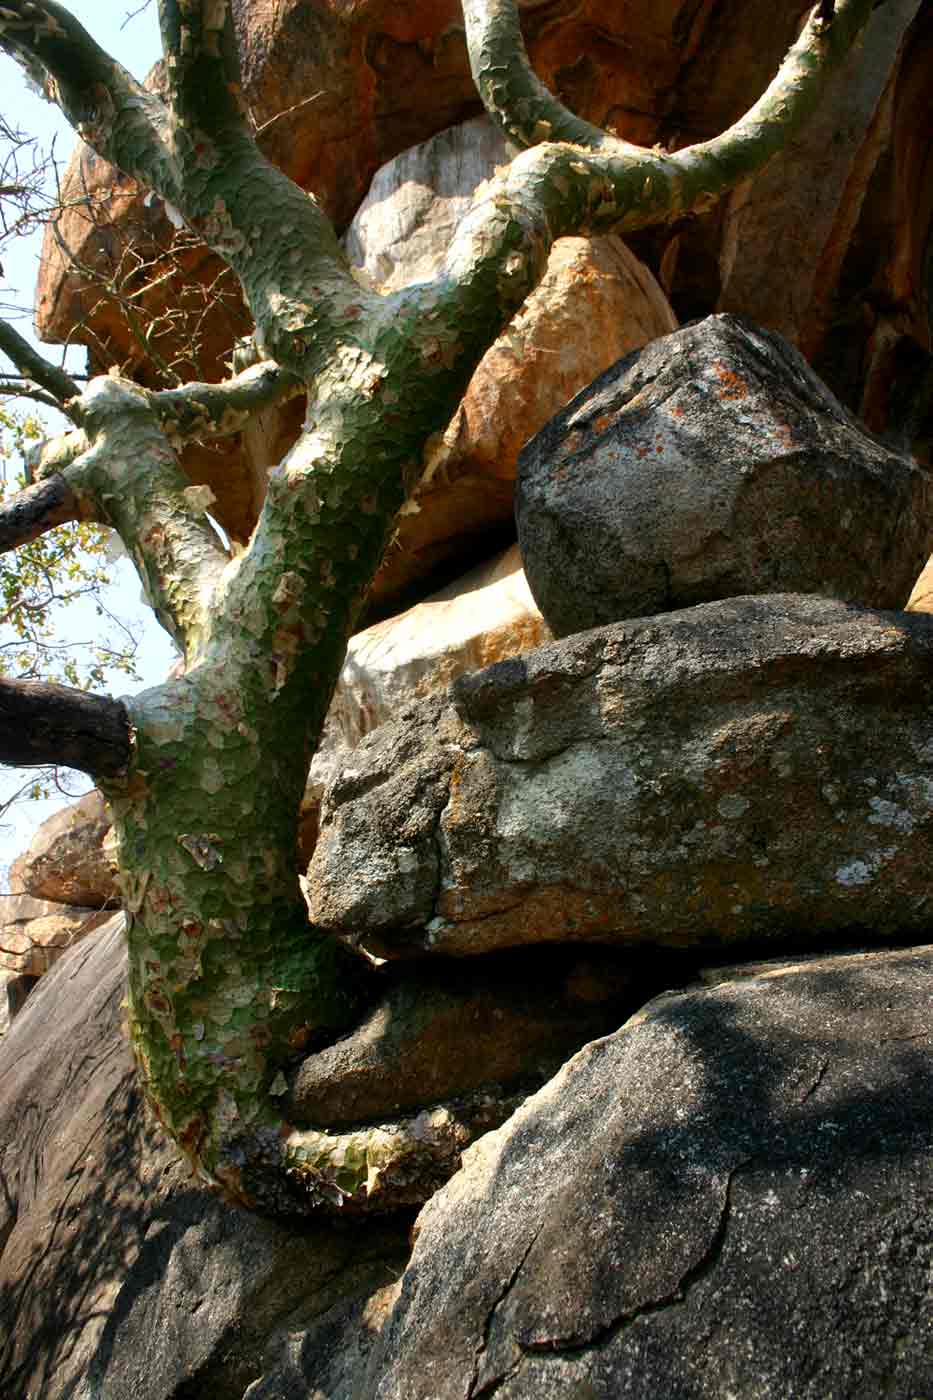 Commiphora marlothii growing in a rocky place.